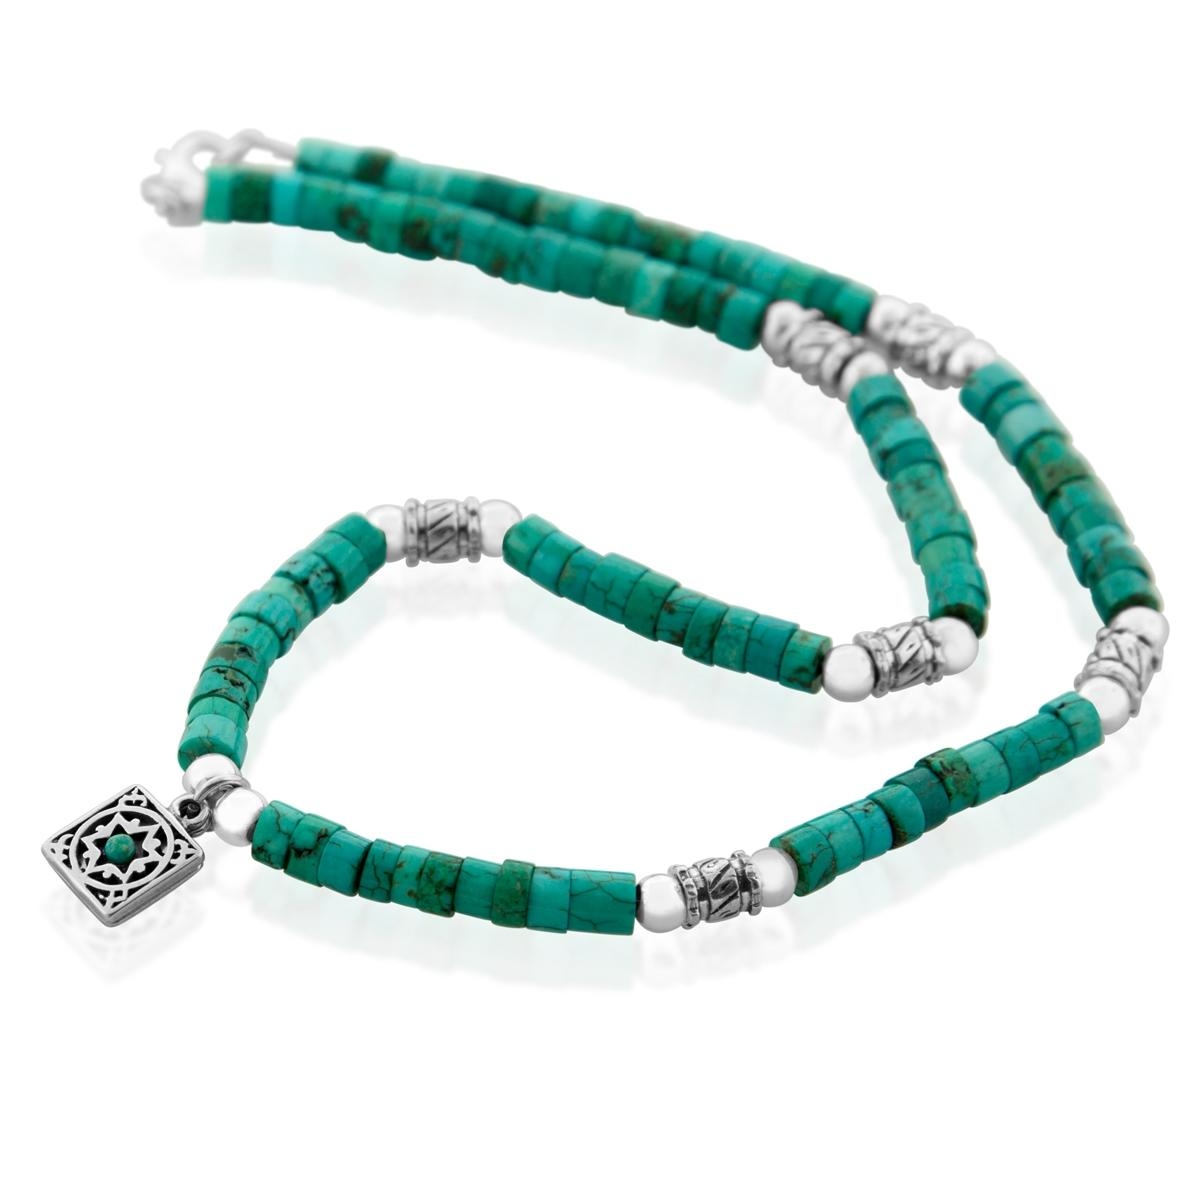 Traveler's Prayer: Silver and Turquoise Stones Star of David Necklace - 3